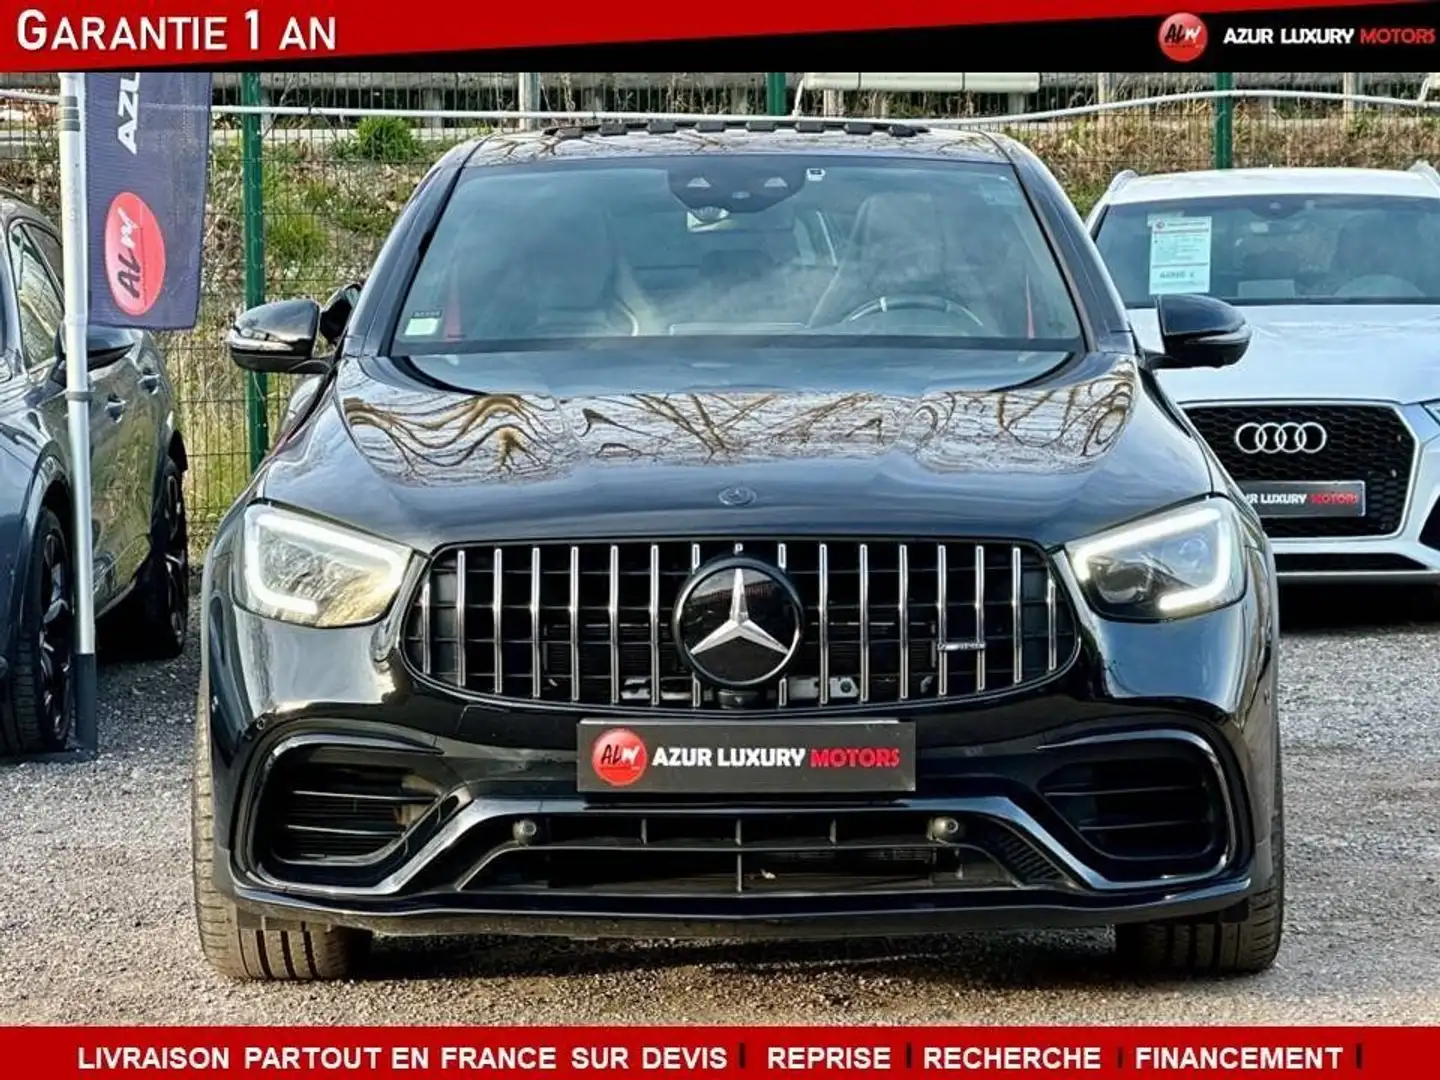 Mercedes-Benz GLC 63 AMG COUPE (2) 63 AMG S 4 MATIC + 9G-TRONIC - 2